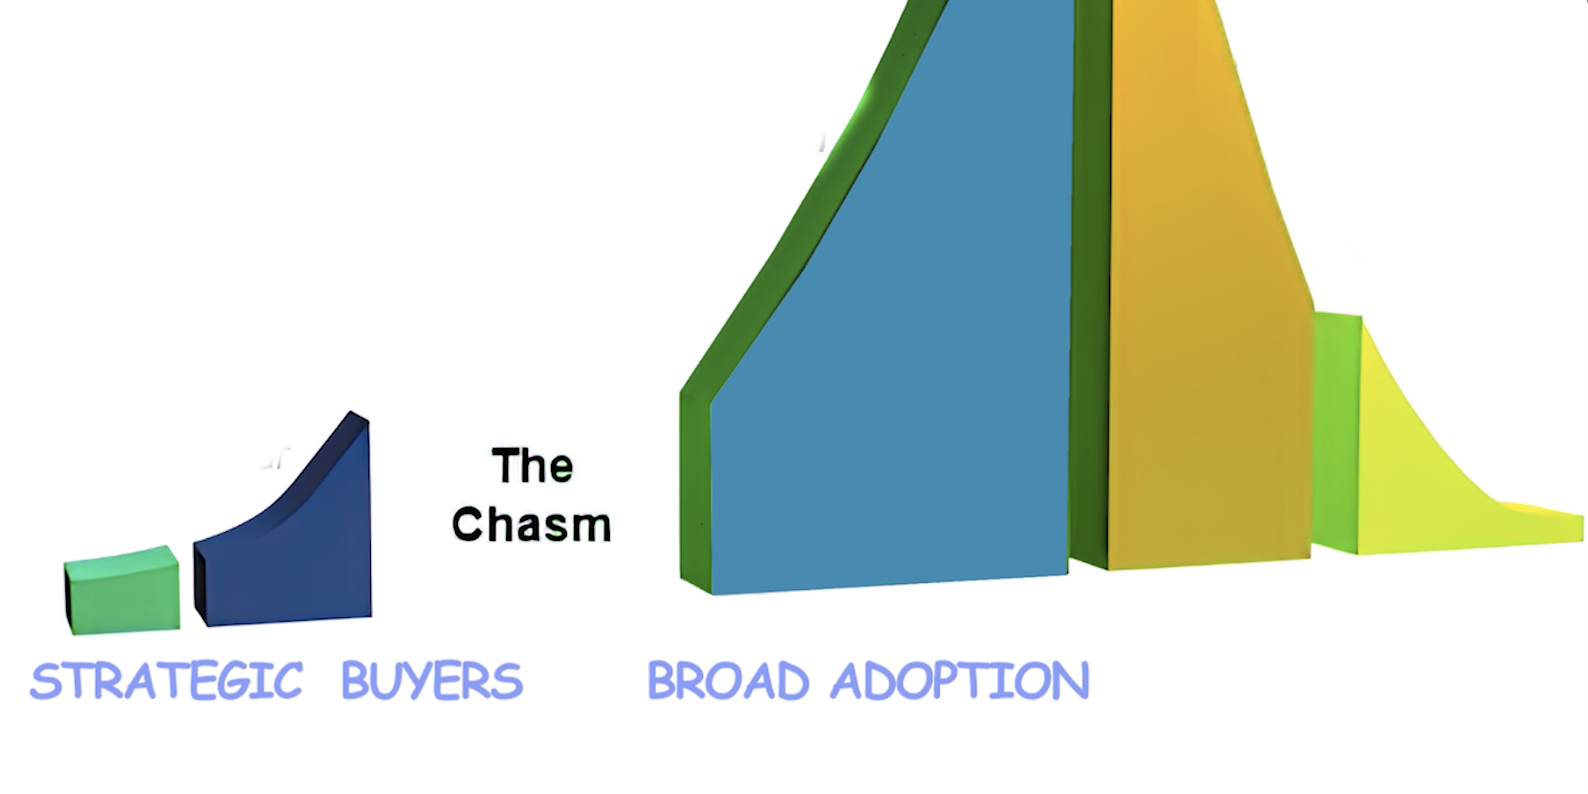 The chasm